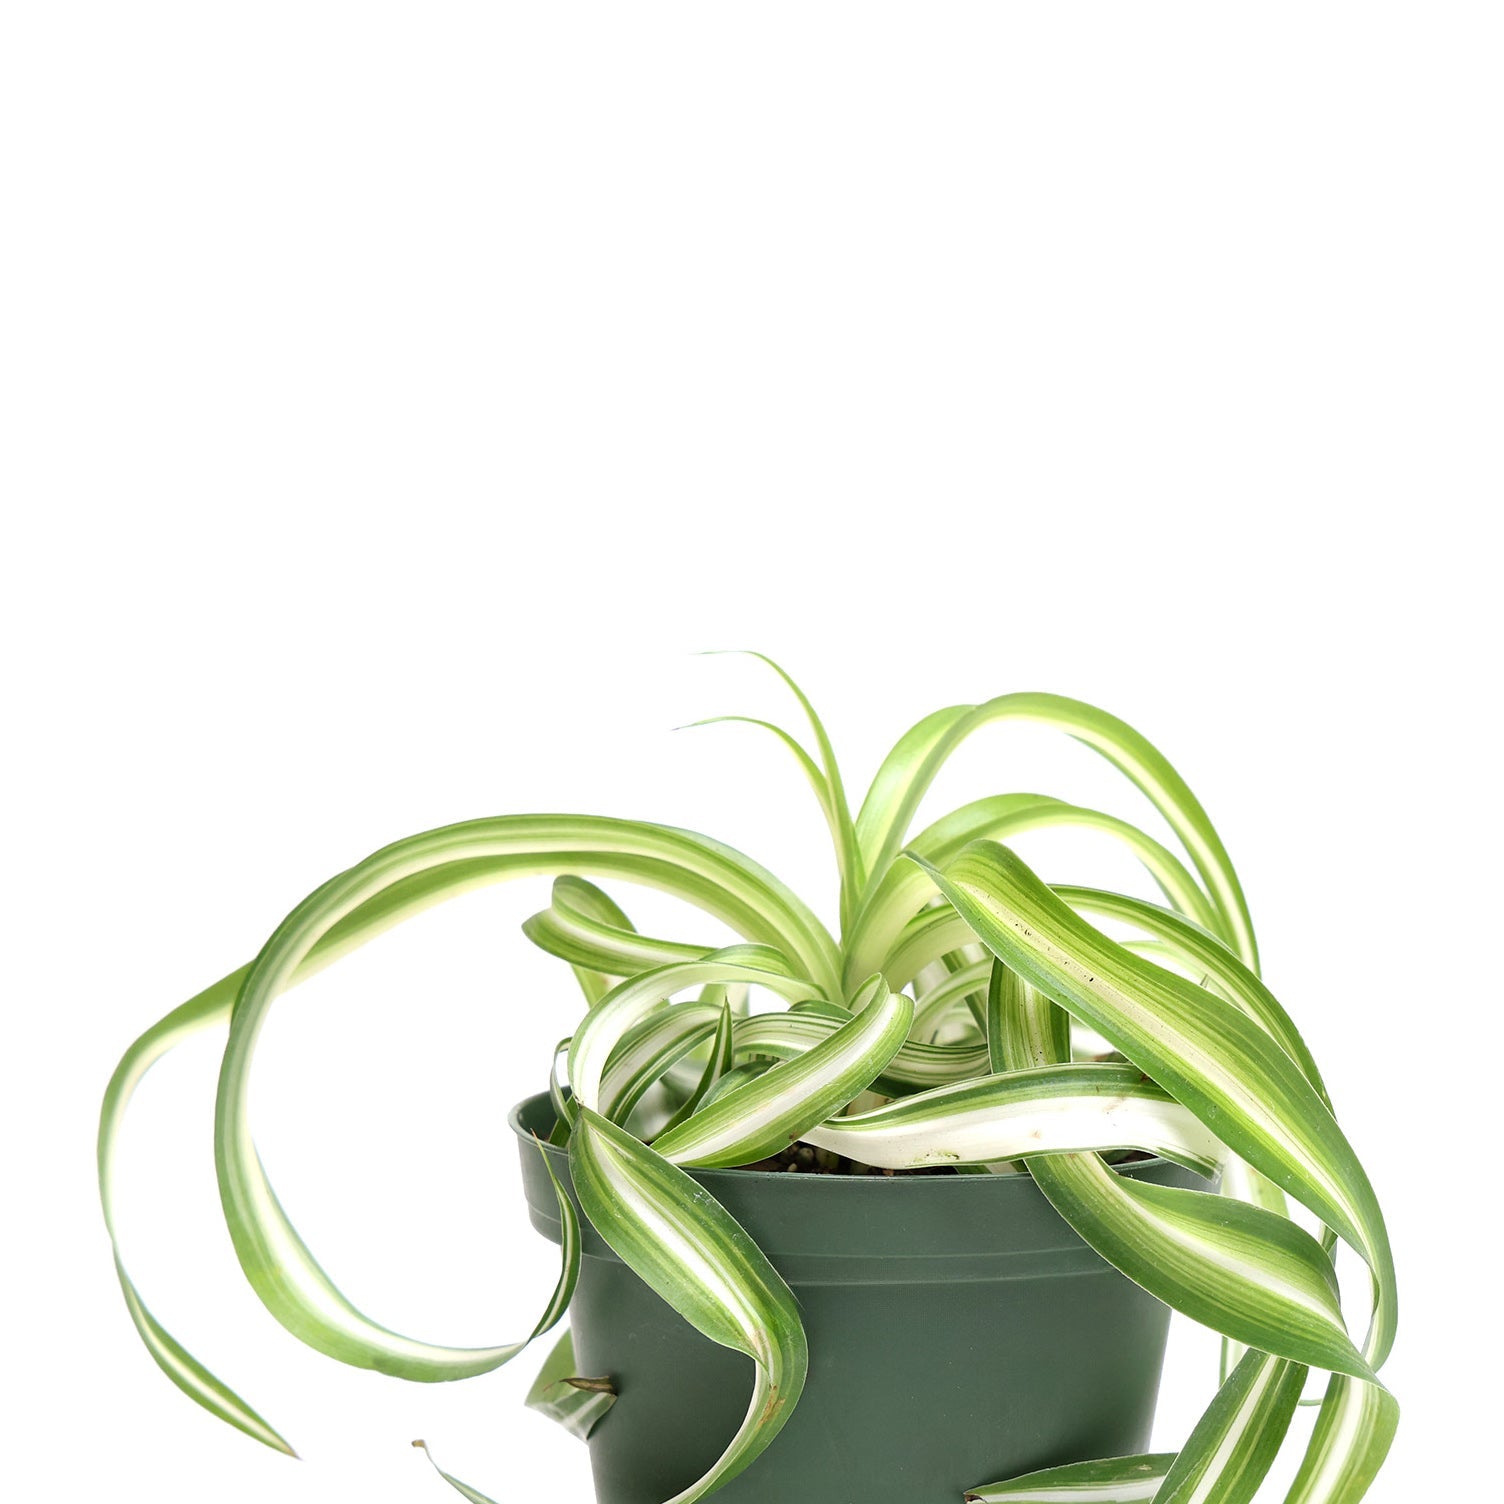 A green and white striped Chive Studio Spider Plant Bone 4 Inches in a dark green pot against a white background. The long, slender leaves arch gracefully outward.